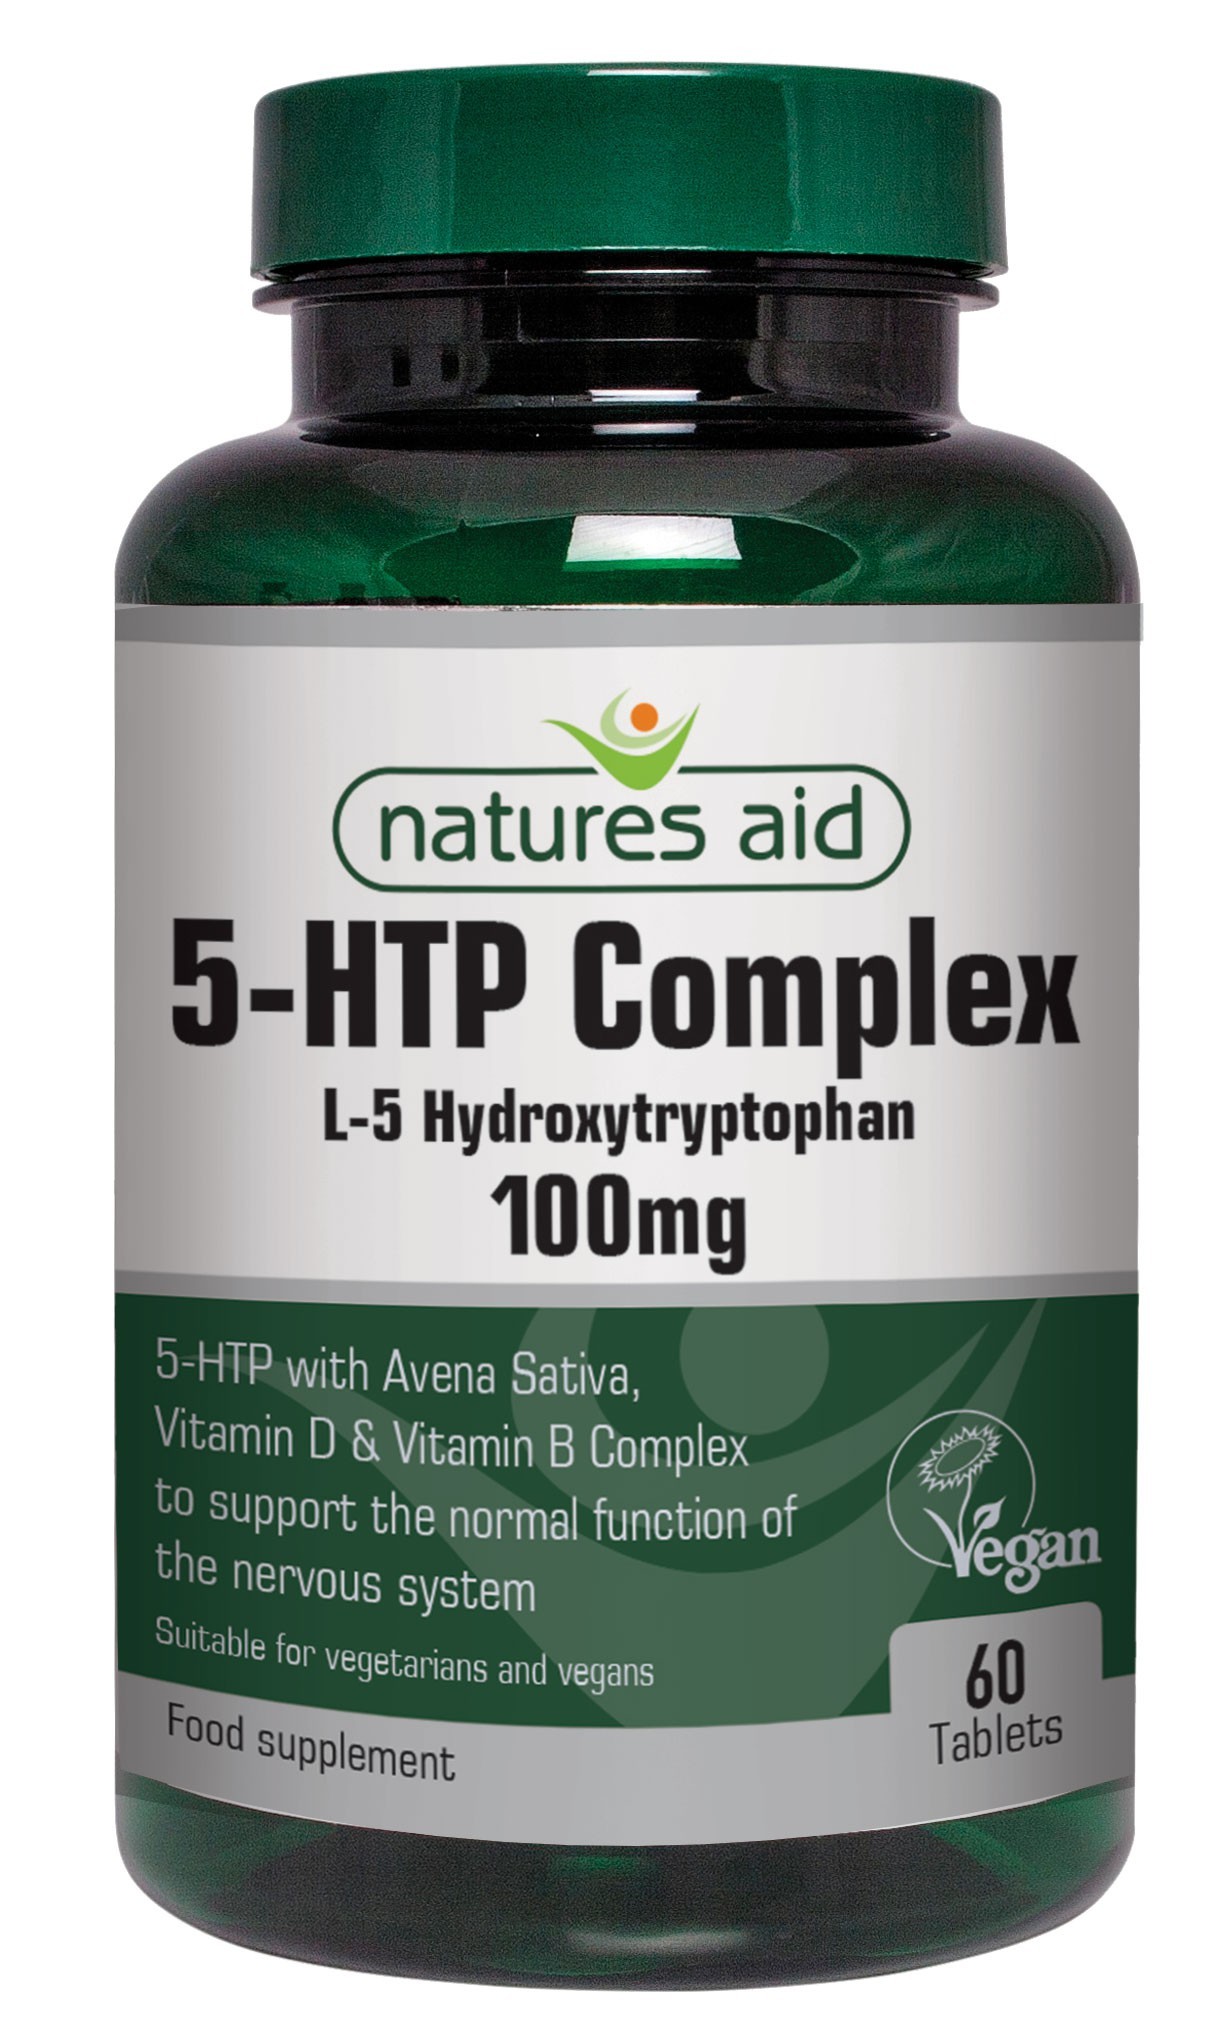 Natures Aid 5-Htp Complex 100mg